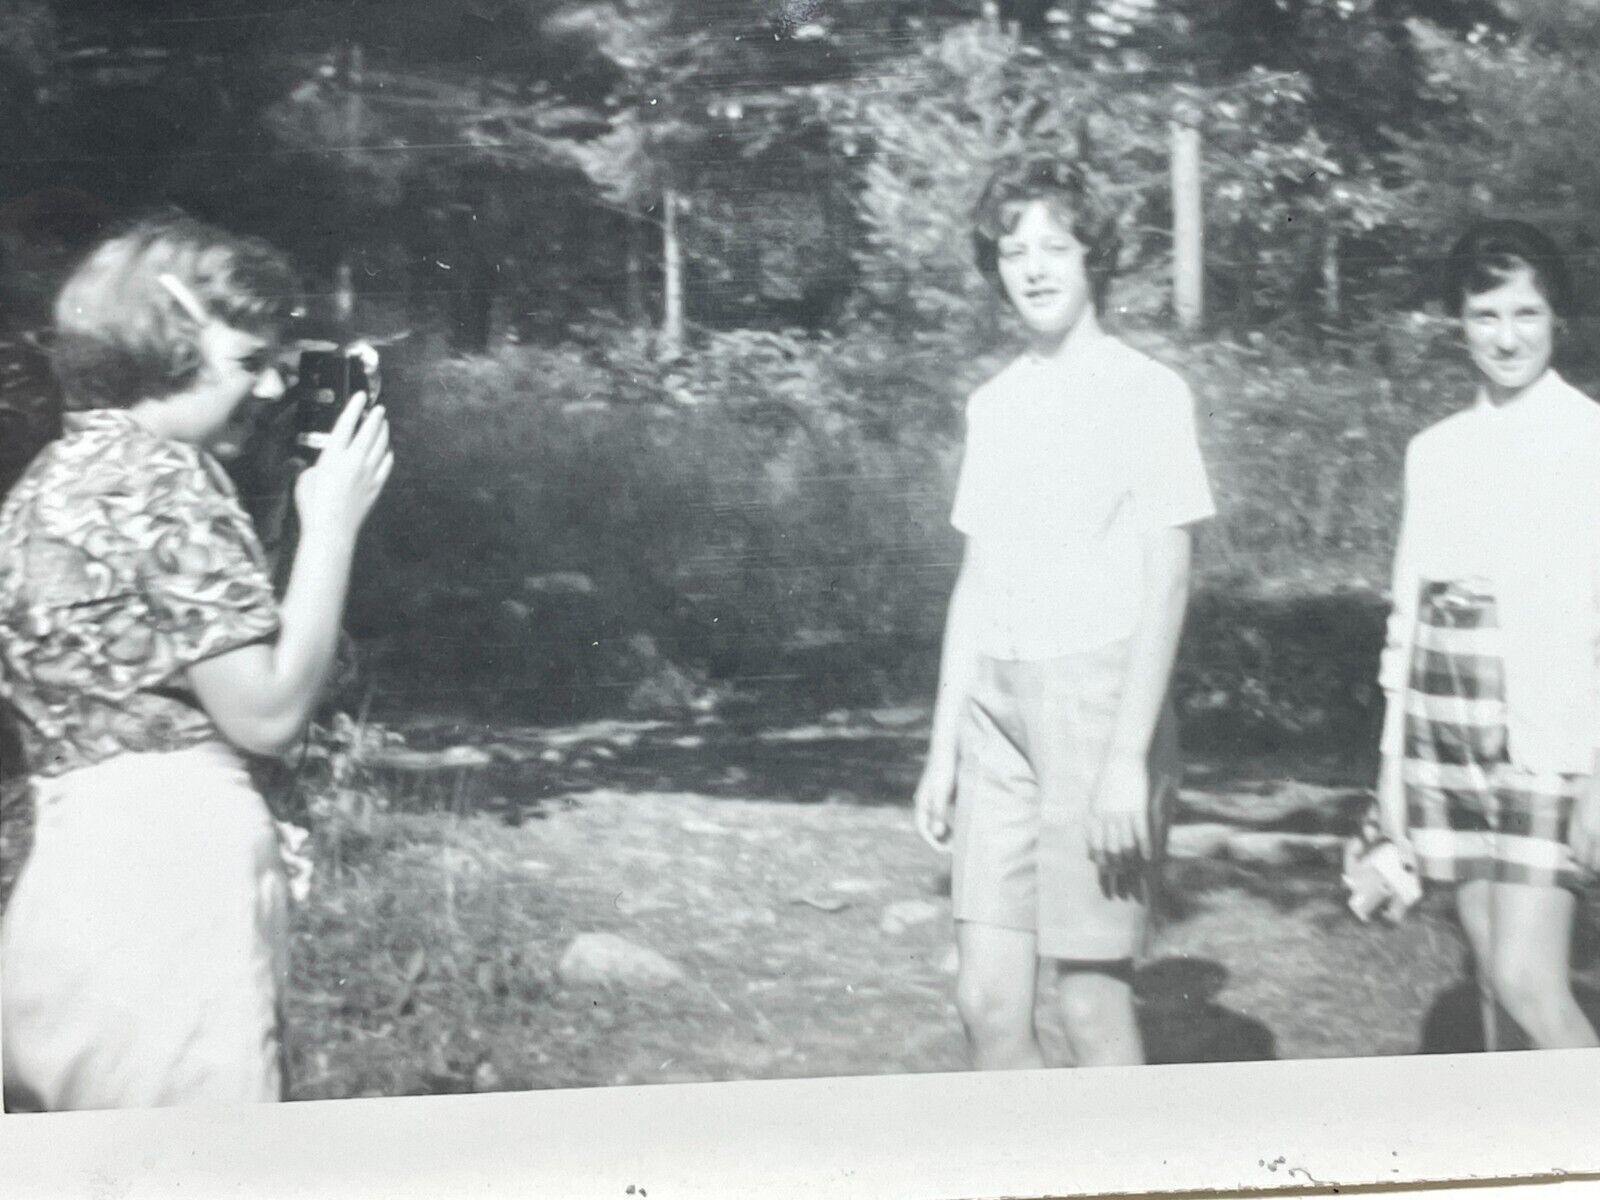 SC Photograph Girl Taking Picture Holding Aiming Camera 1961 Camp Naomi